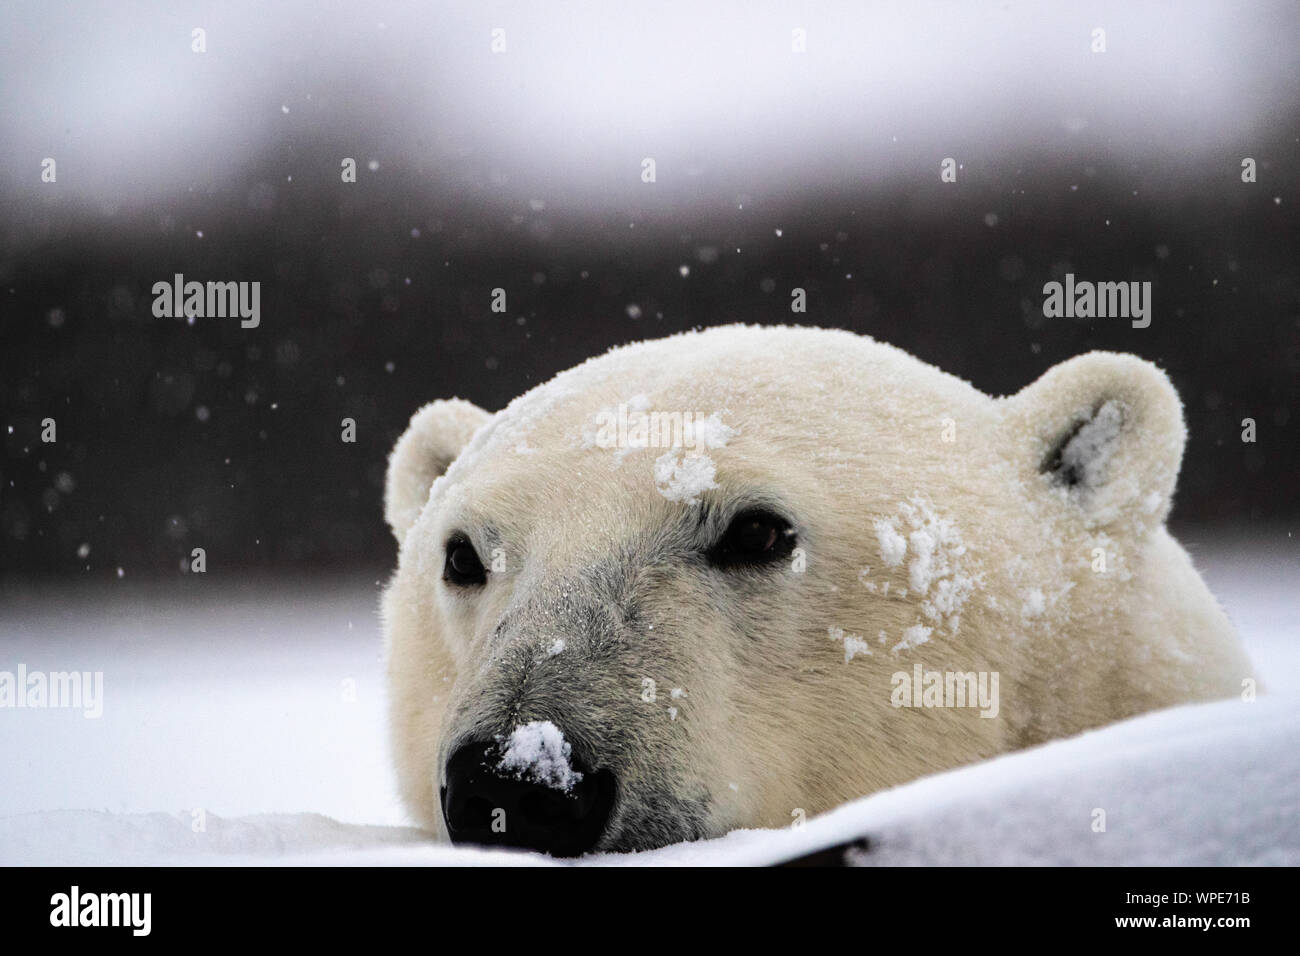 Polar bear with its nose in the  falling snow, Nanuk Lodge, West hudson Bay, Churchill, Manitoba, Canada Stock Photo